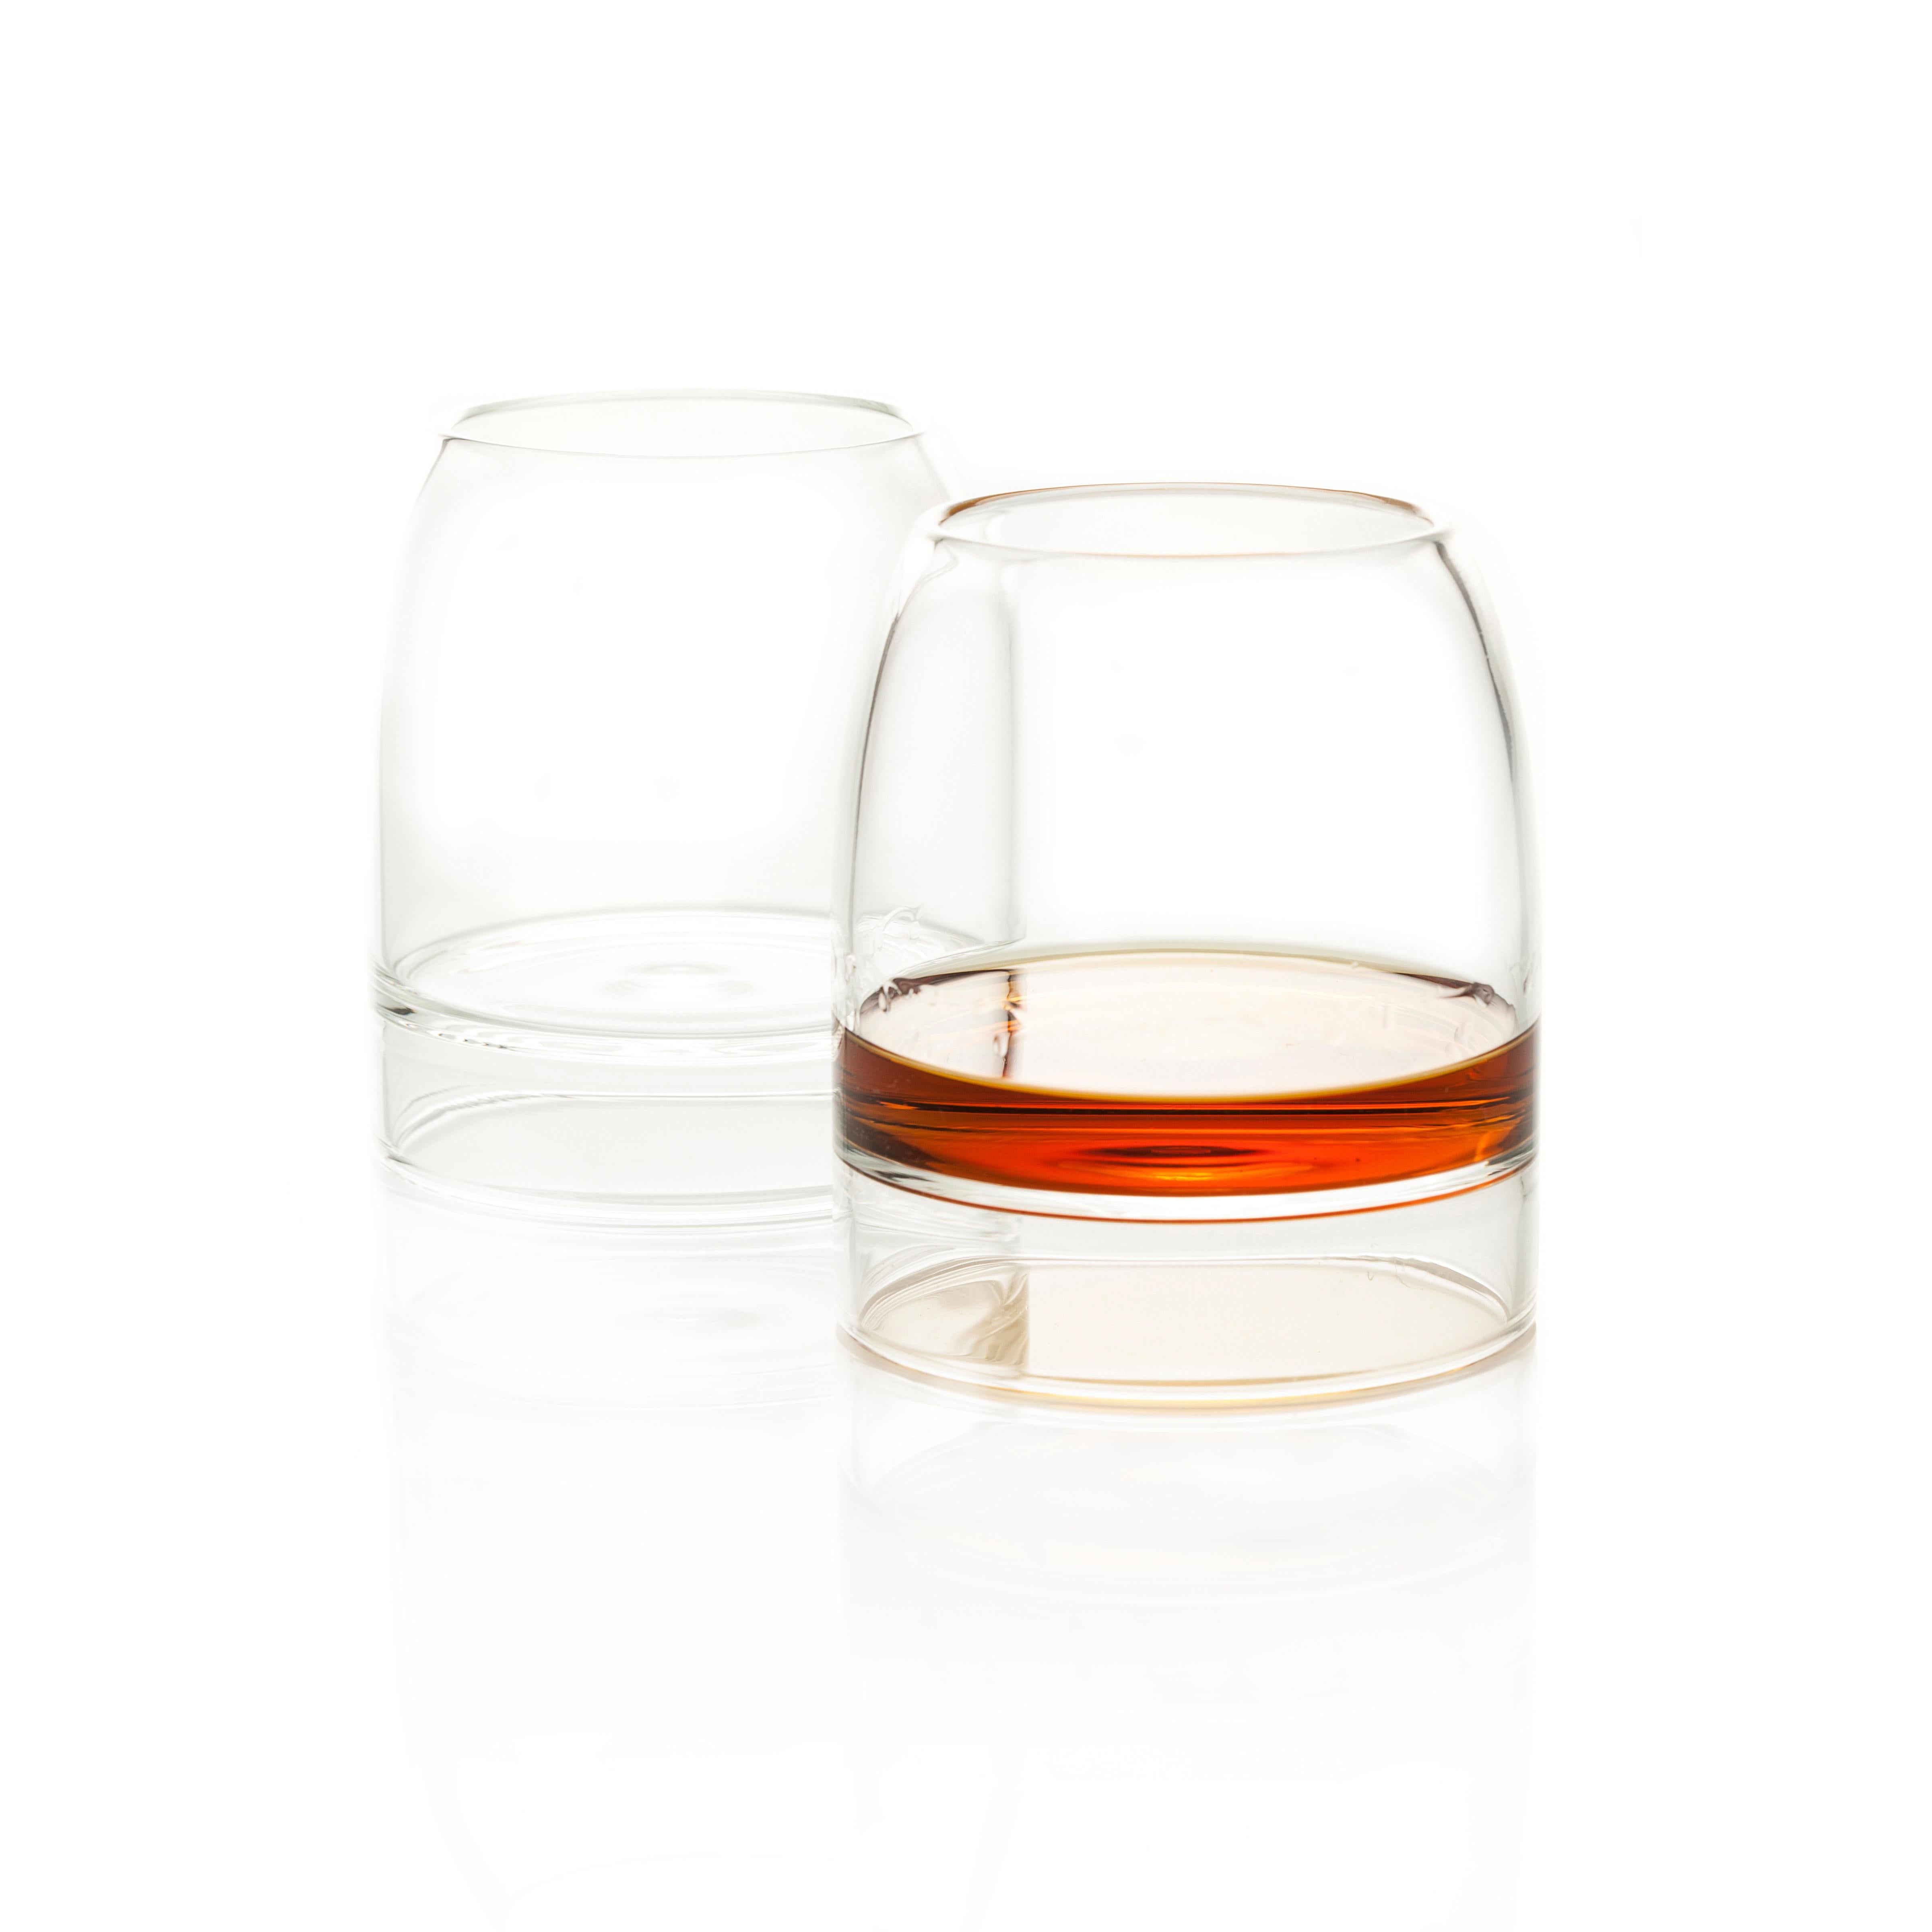 Rare whiskey glasses, set of two.

Inspired by the pleasures of fine whisky, the rare whisky glasses concentrate the aroma, enhancing the flavor through its design. Each glass is individually hand-formed by master glassblowers from the finest